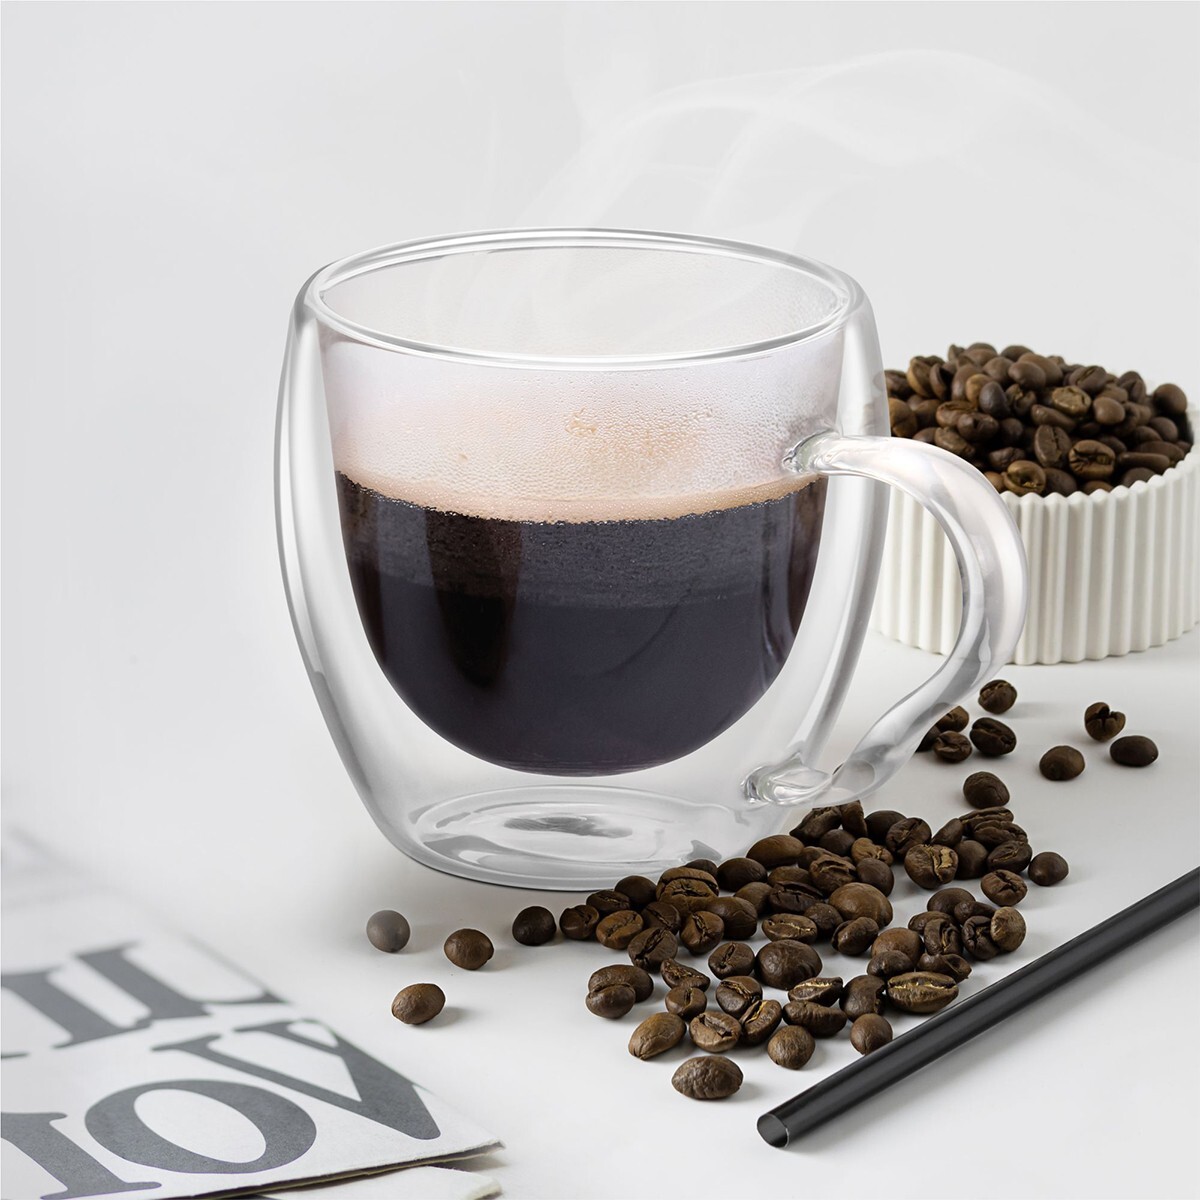 Treo Double Wall Expresso Glass Cup 105ml